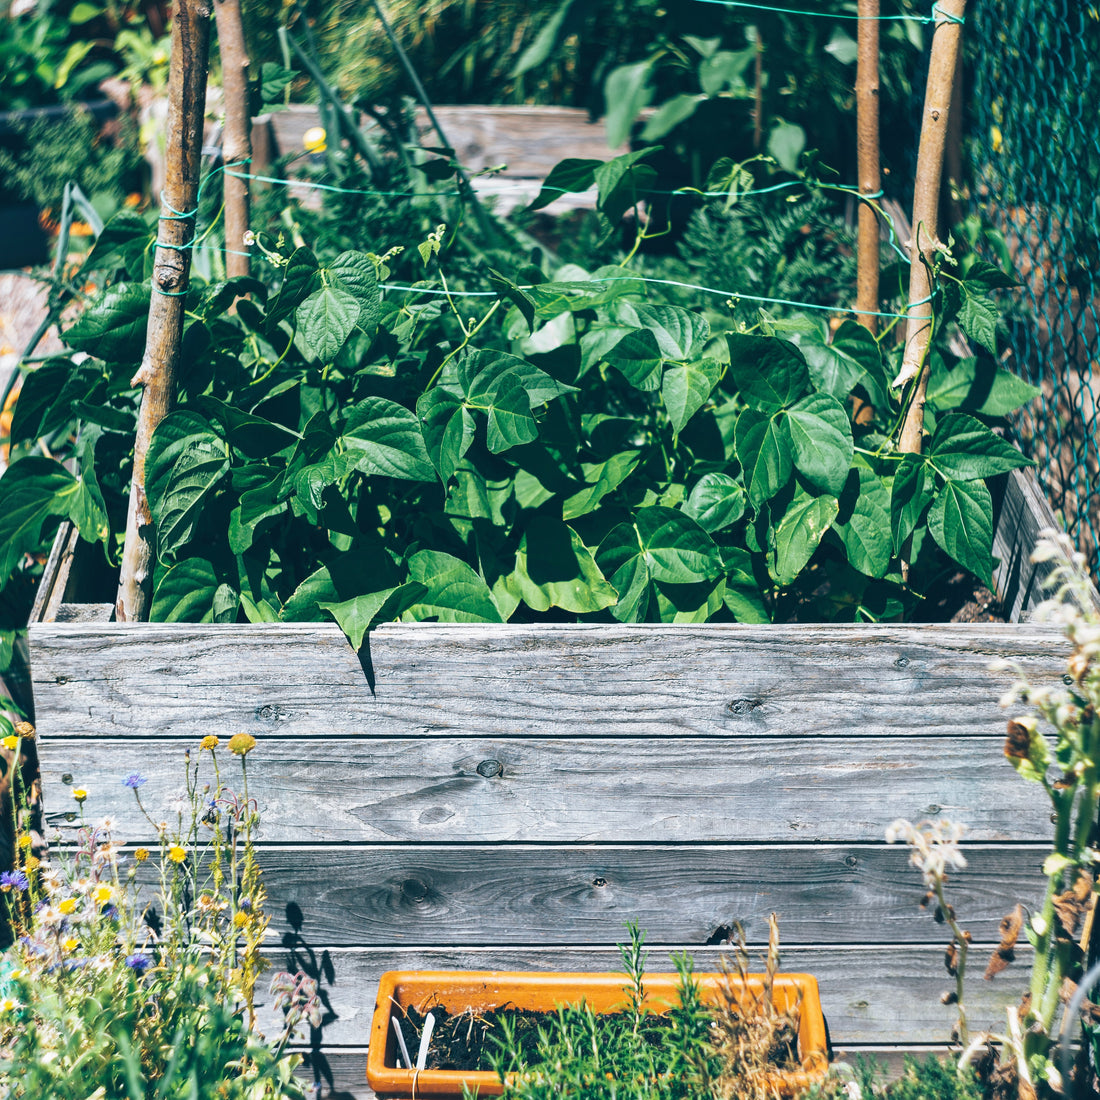 4 Reasons Why Composting is Awesome